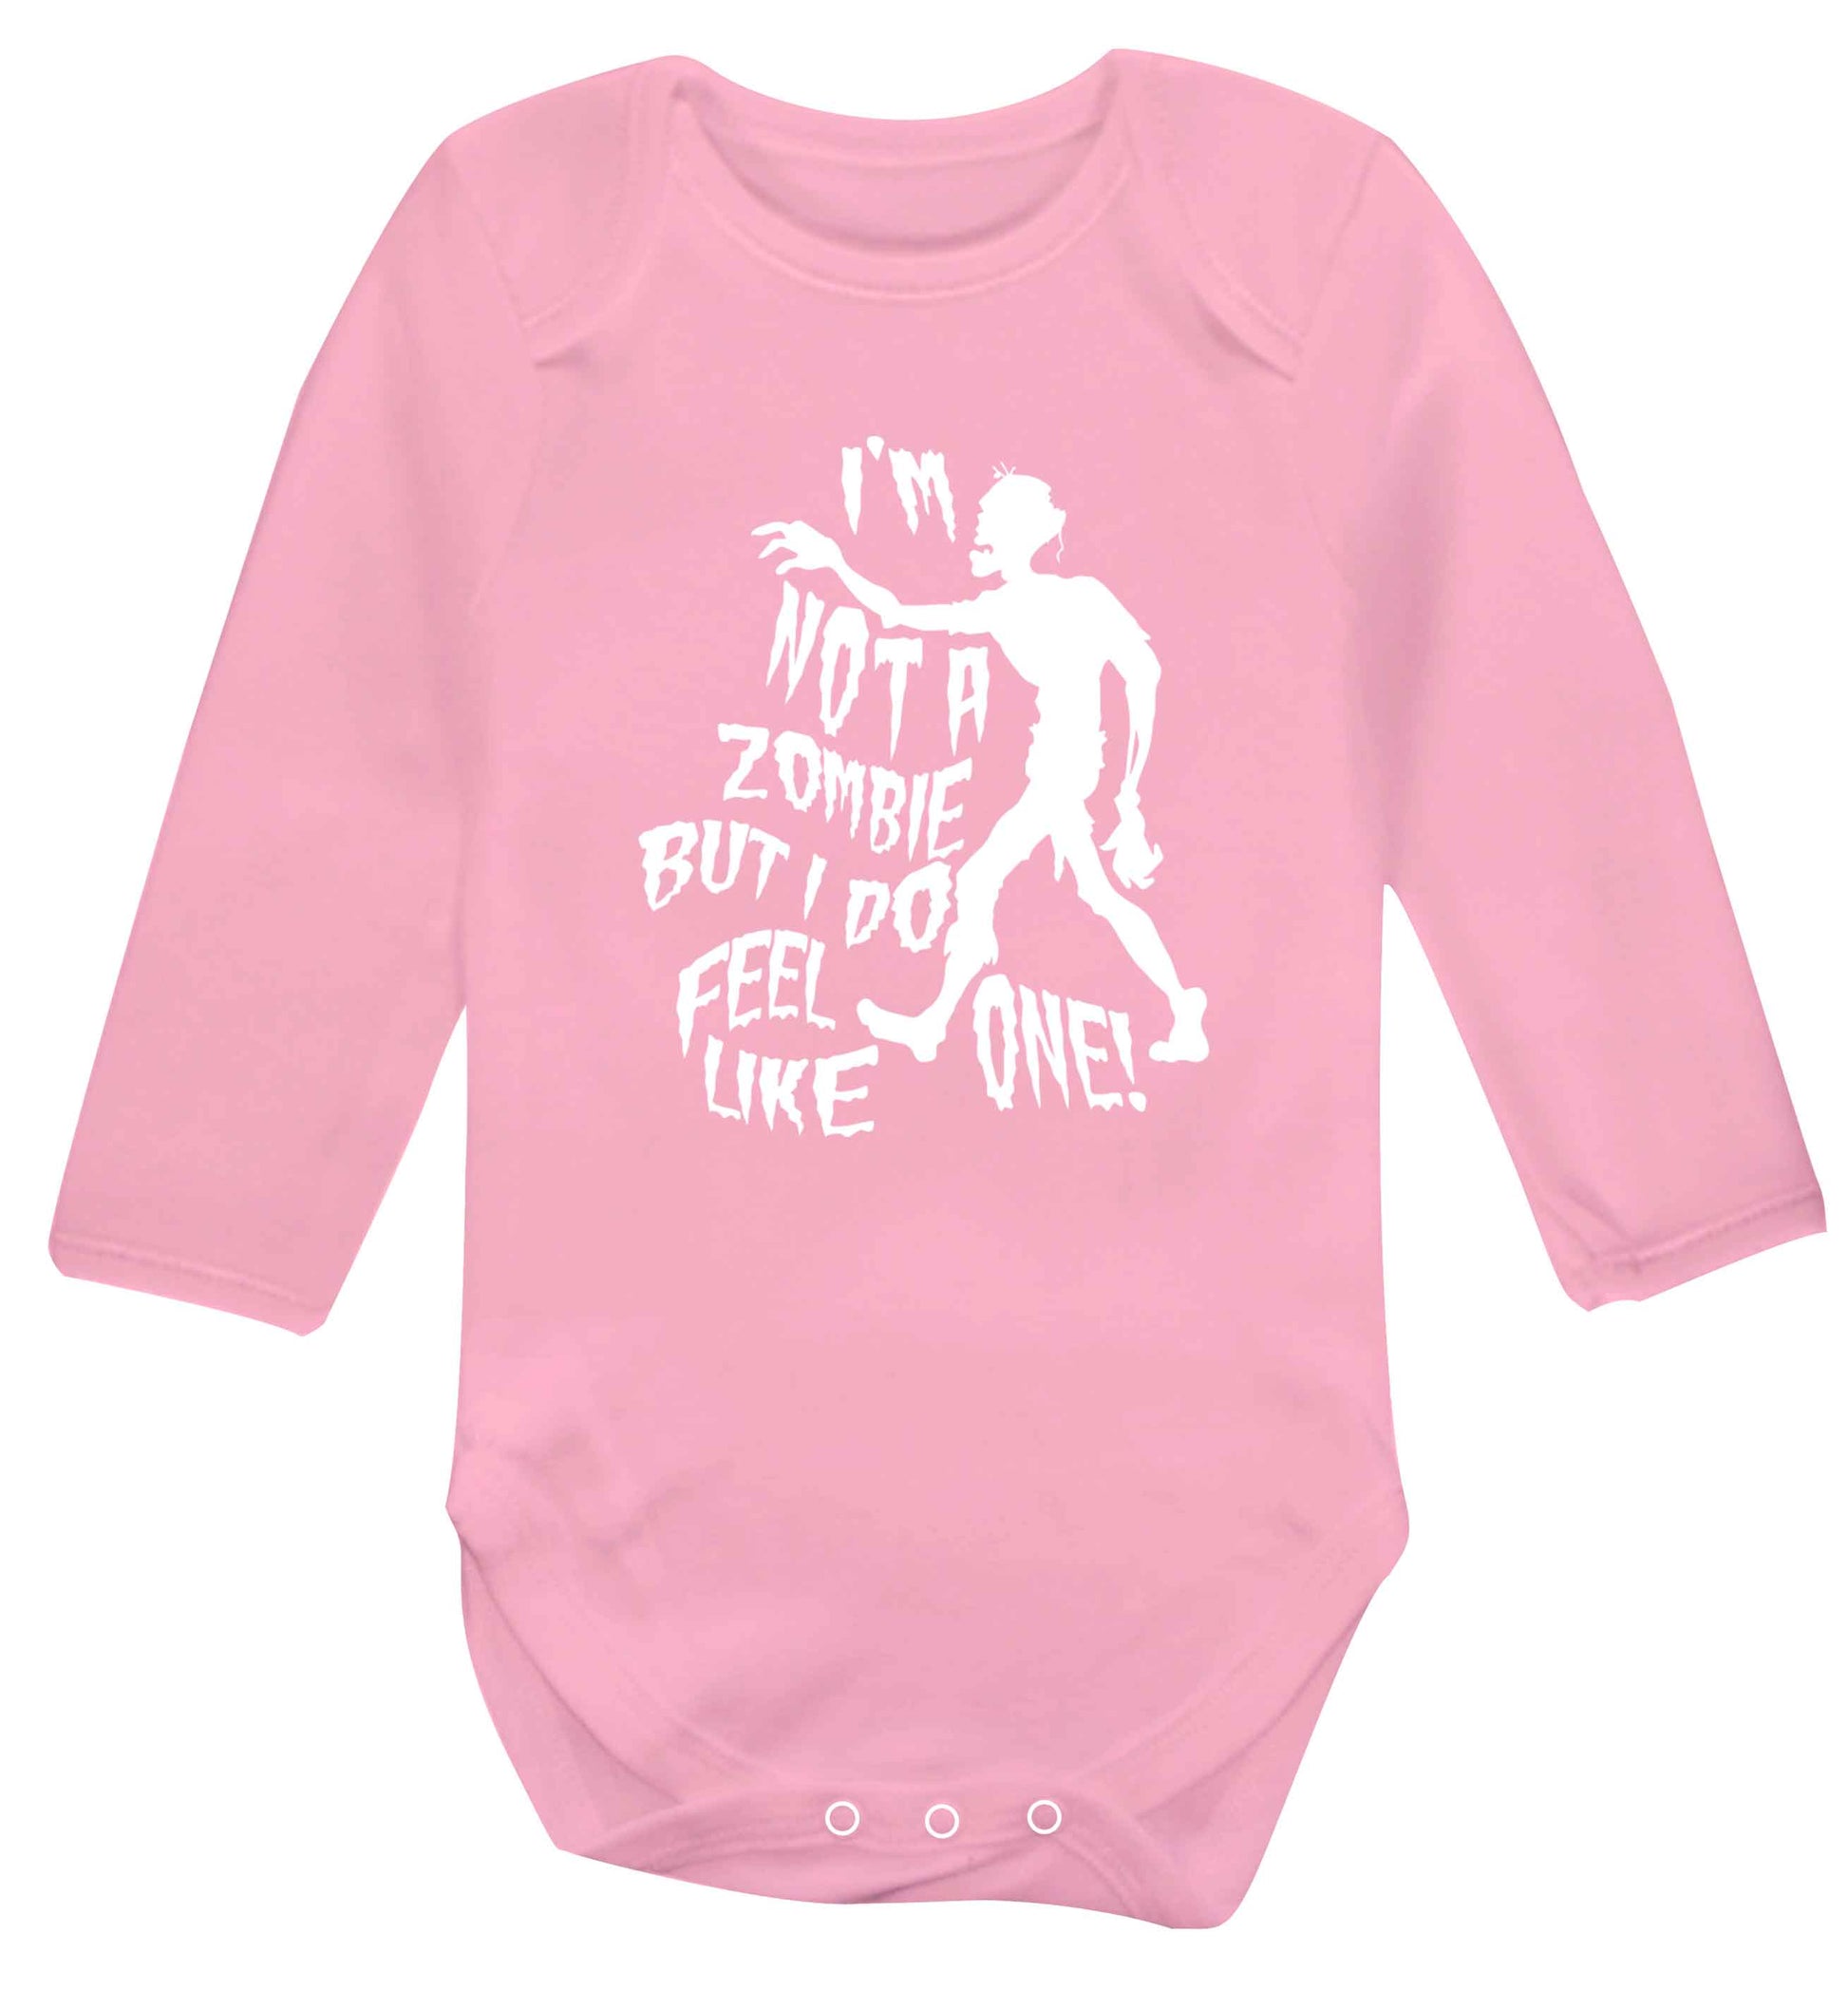 I'm not a zombie but I do feel like one! Baby Vest long sleeved pale pink 6-12 months